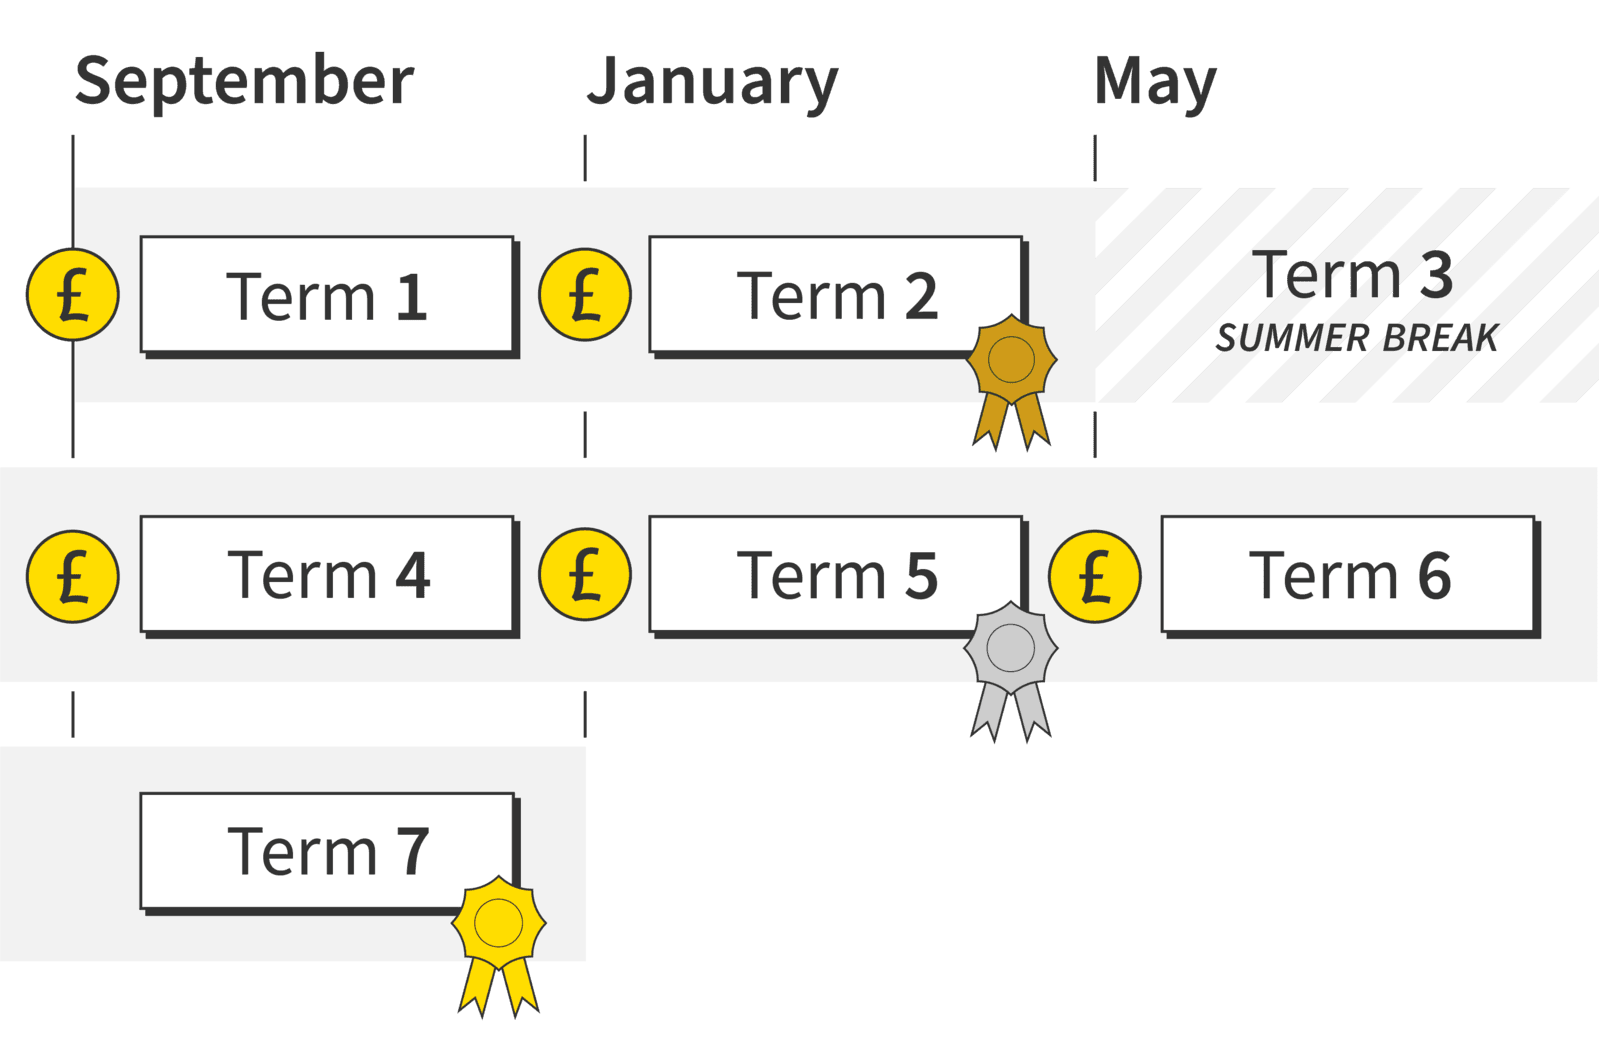 Infographic summarising the example payment schedule described above.